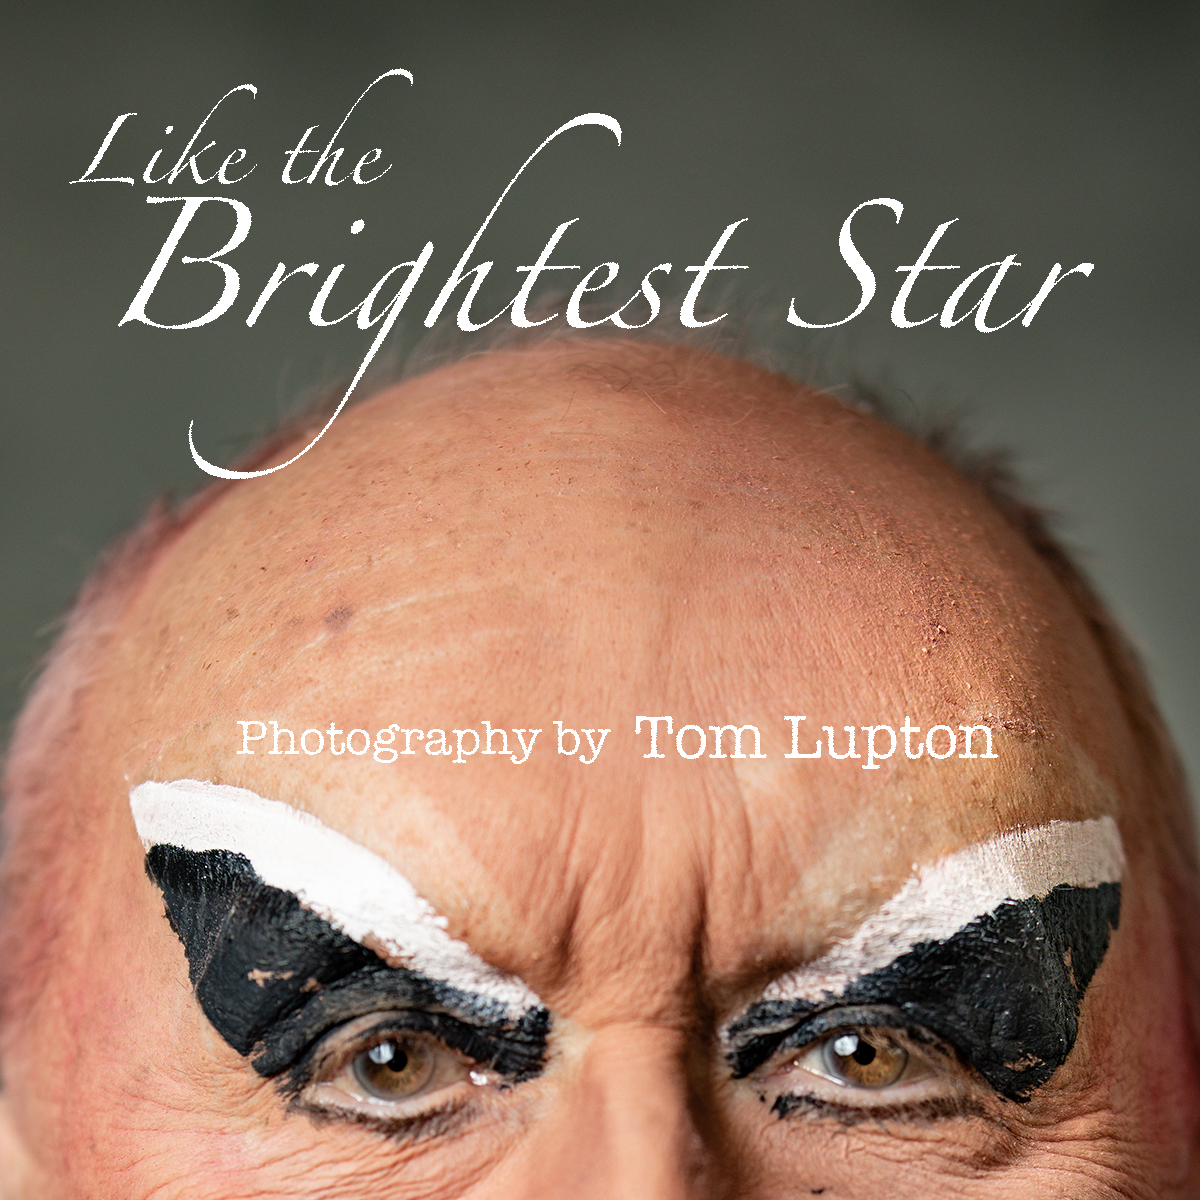 Preview image for Photography Exhibit: *Like the Brightest Star* by Tom Lupton